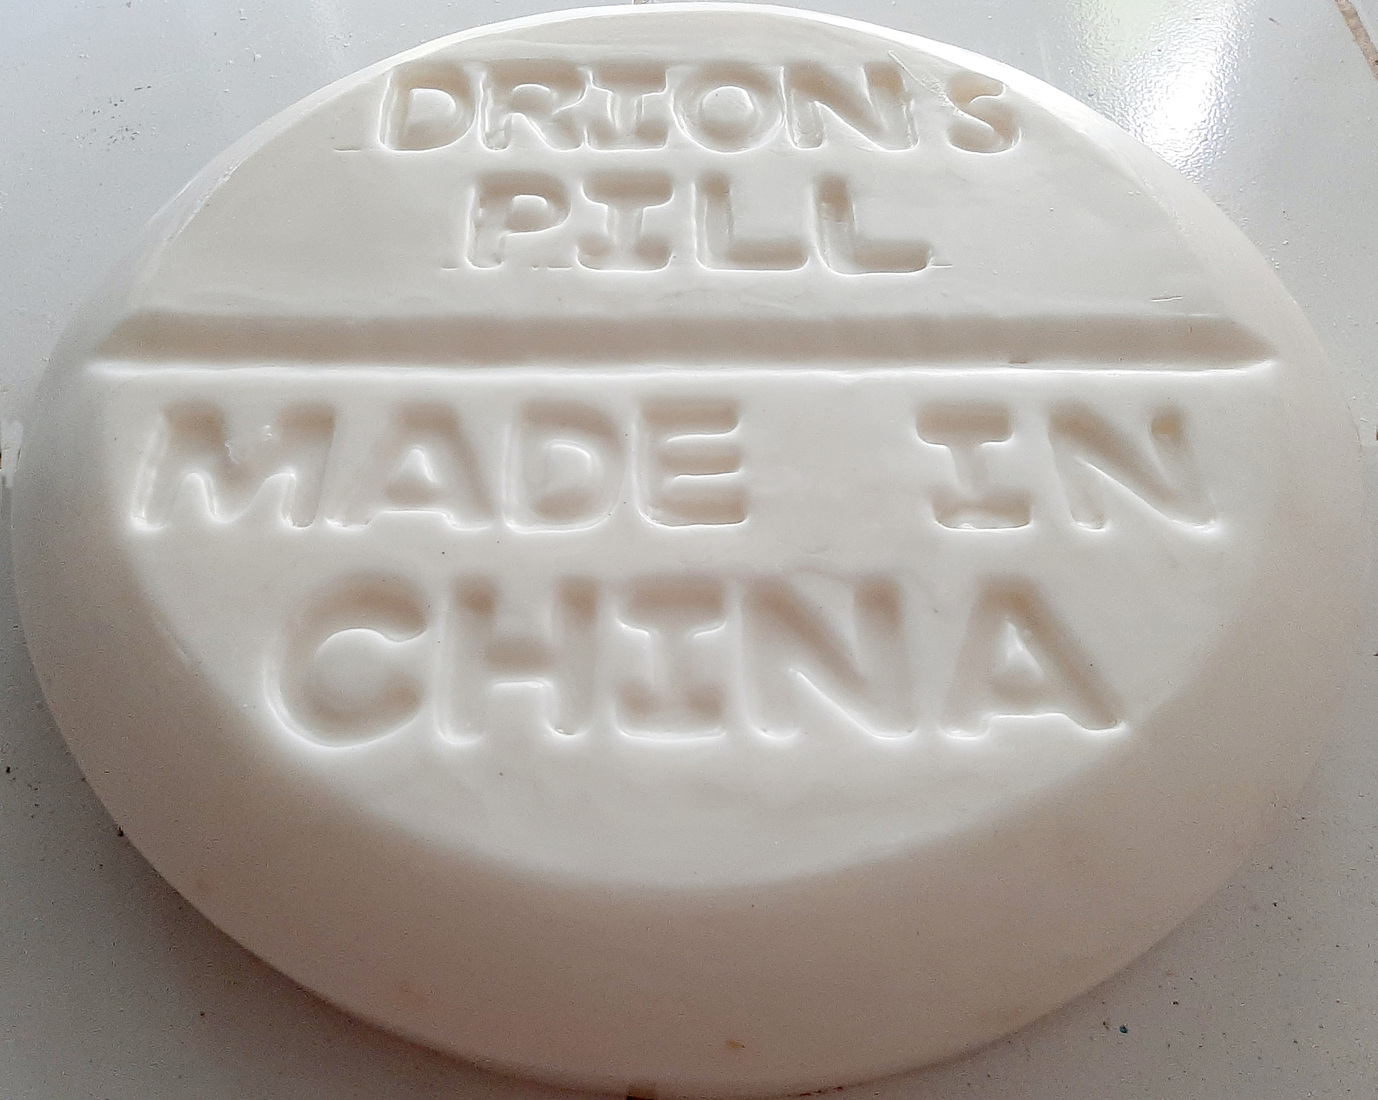 DRIONs PILL / MADE IN CHINA